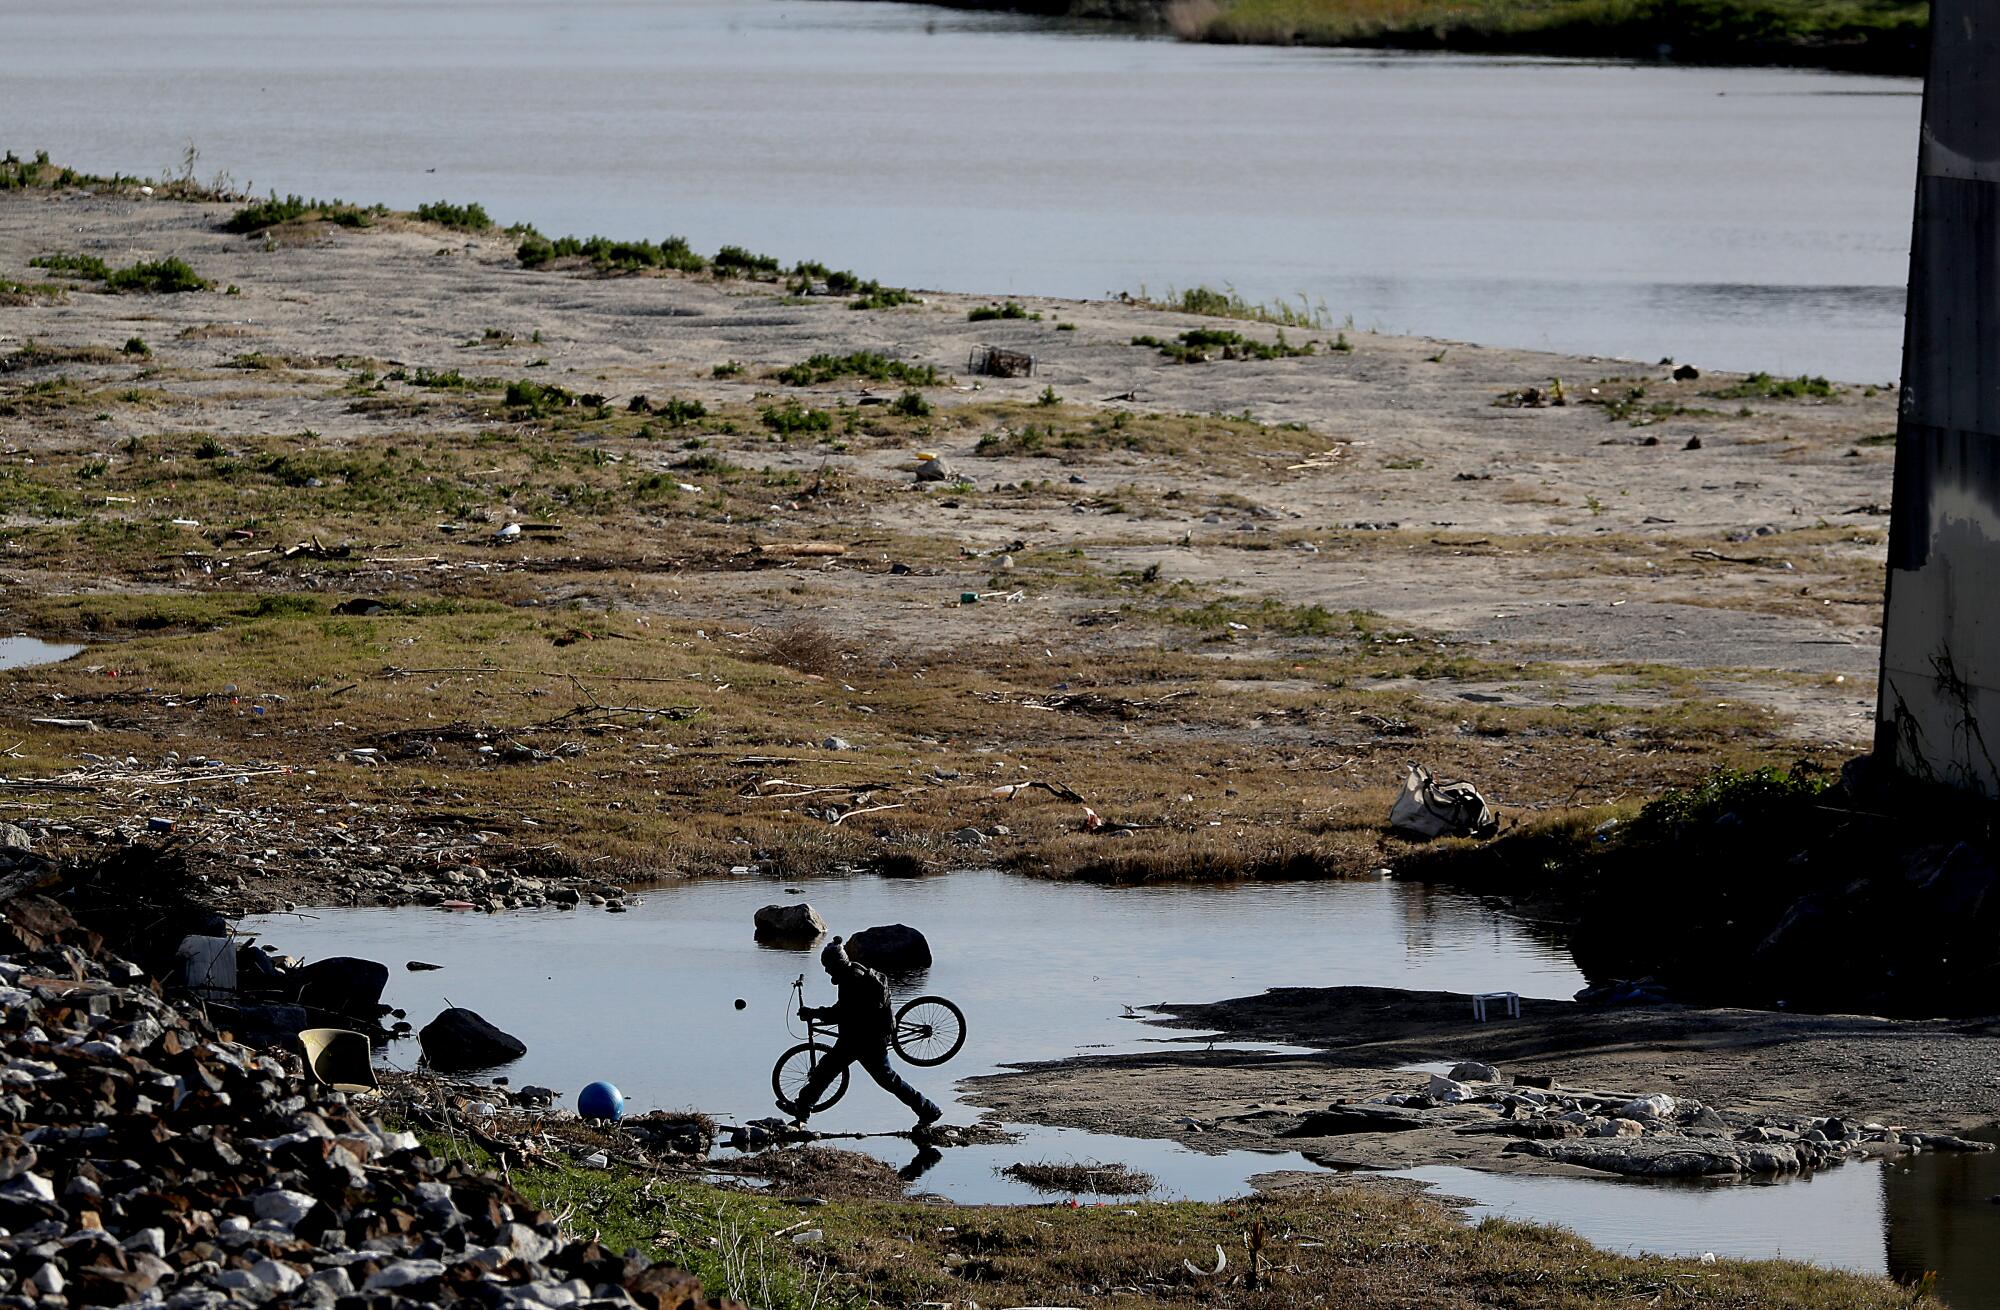 A man, holding a bicycle, hops over a puddle near the Los Angeles River